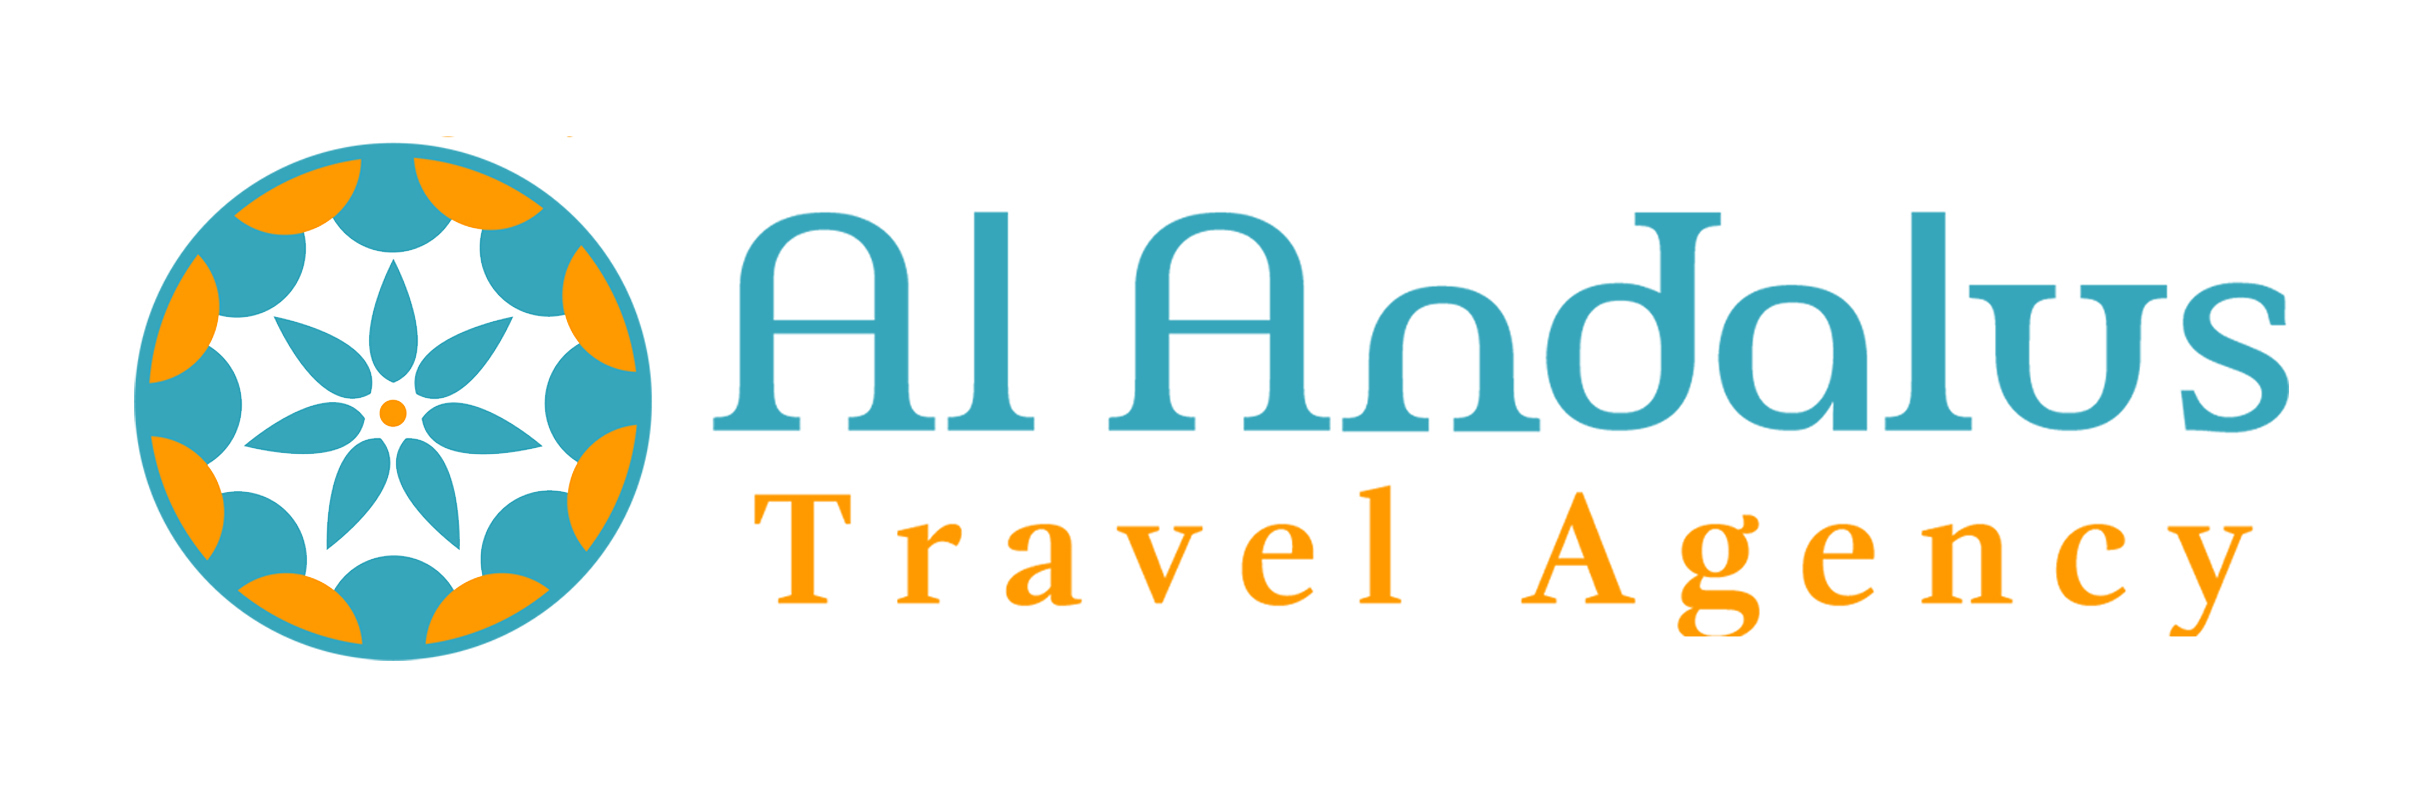 Al Andalus Travel Agency